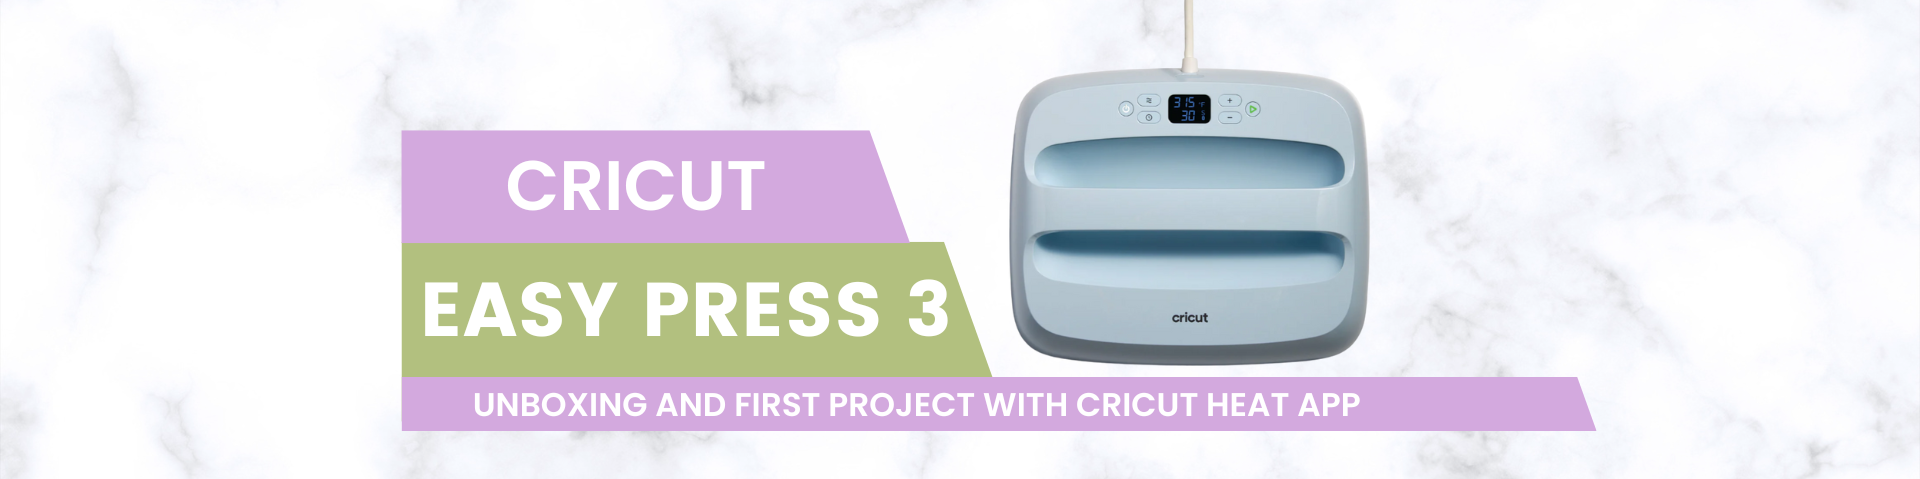 Easy Press 3: Unboxing and First Project with Cricut Heat App